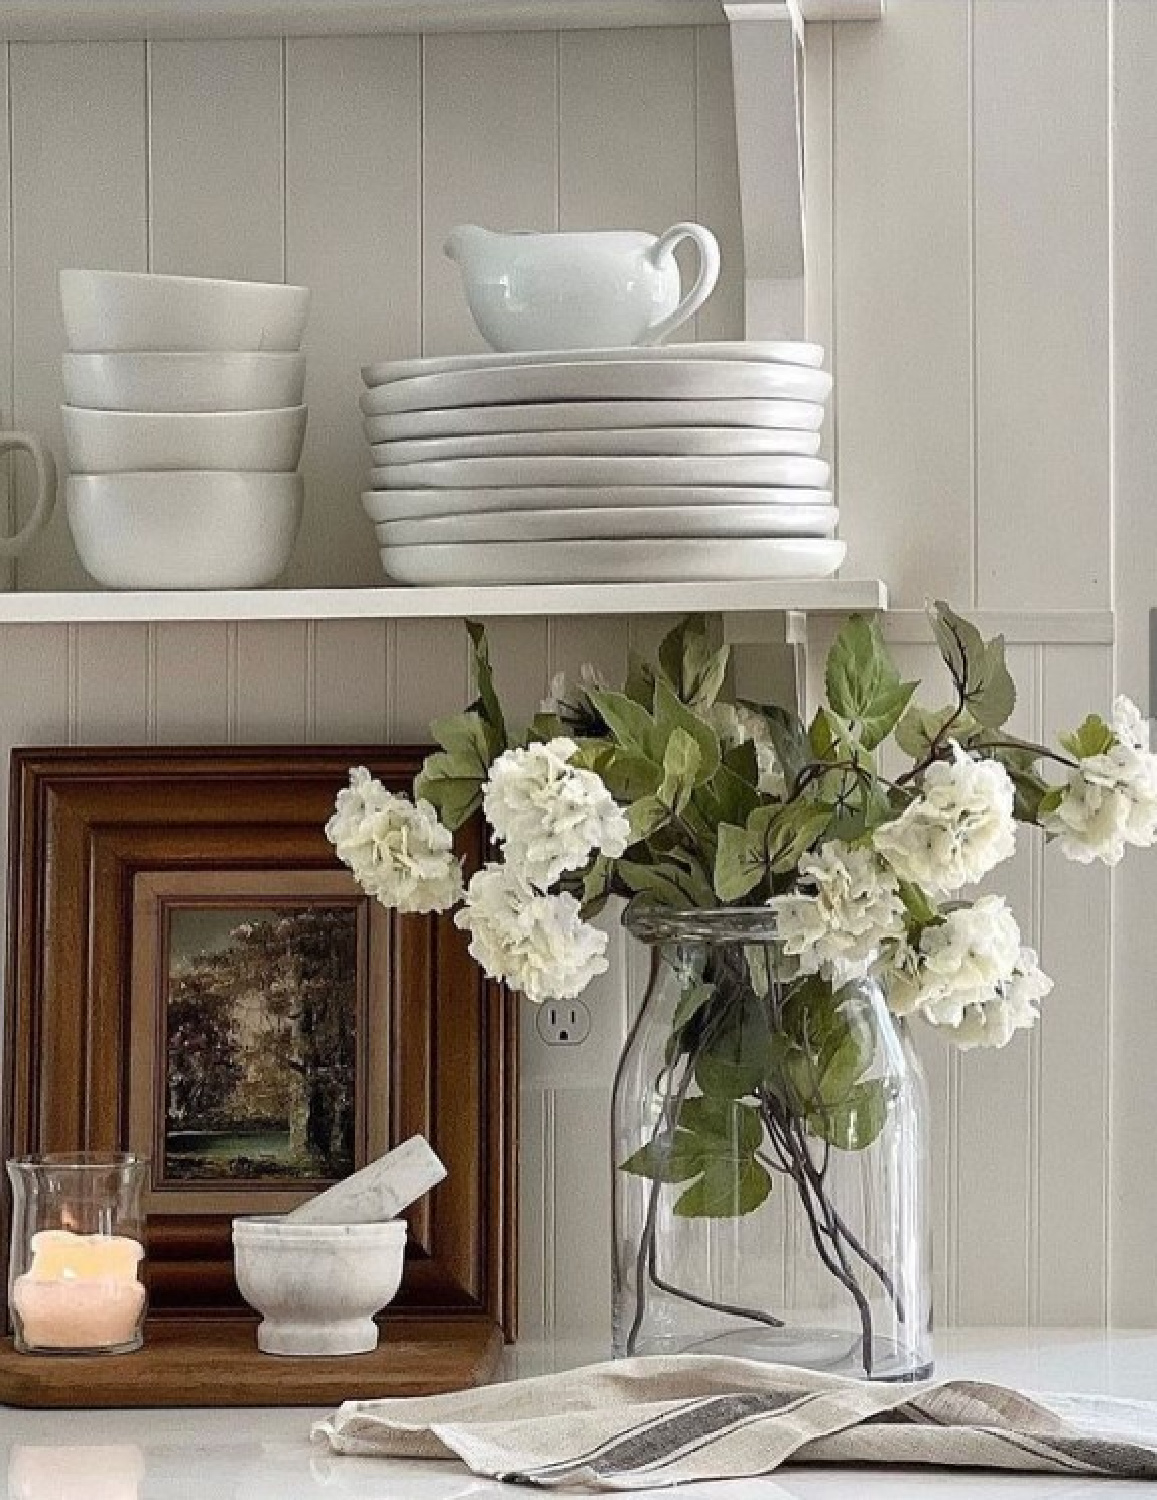 Beautiful American country farmhouse vignette in a white kitchen with open shelving stacked with plates, white flowers in simple jar, mortar and pestle and cande - @handmade_farmhouse. #americancountry #whitecountrykitchen